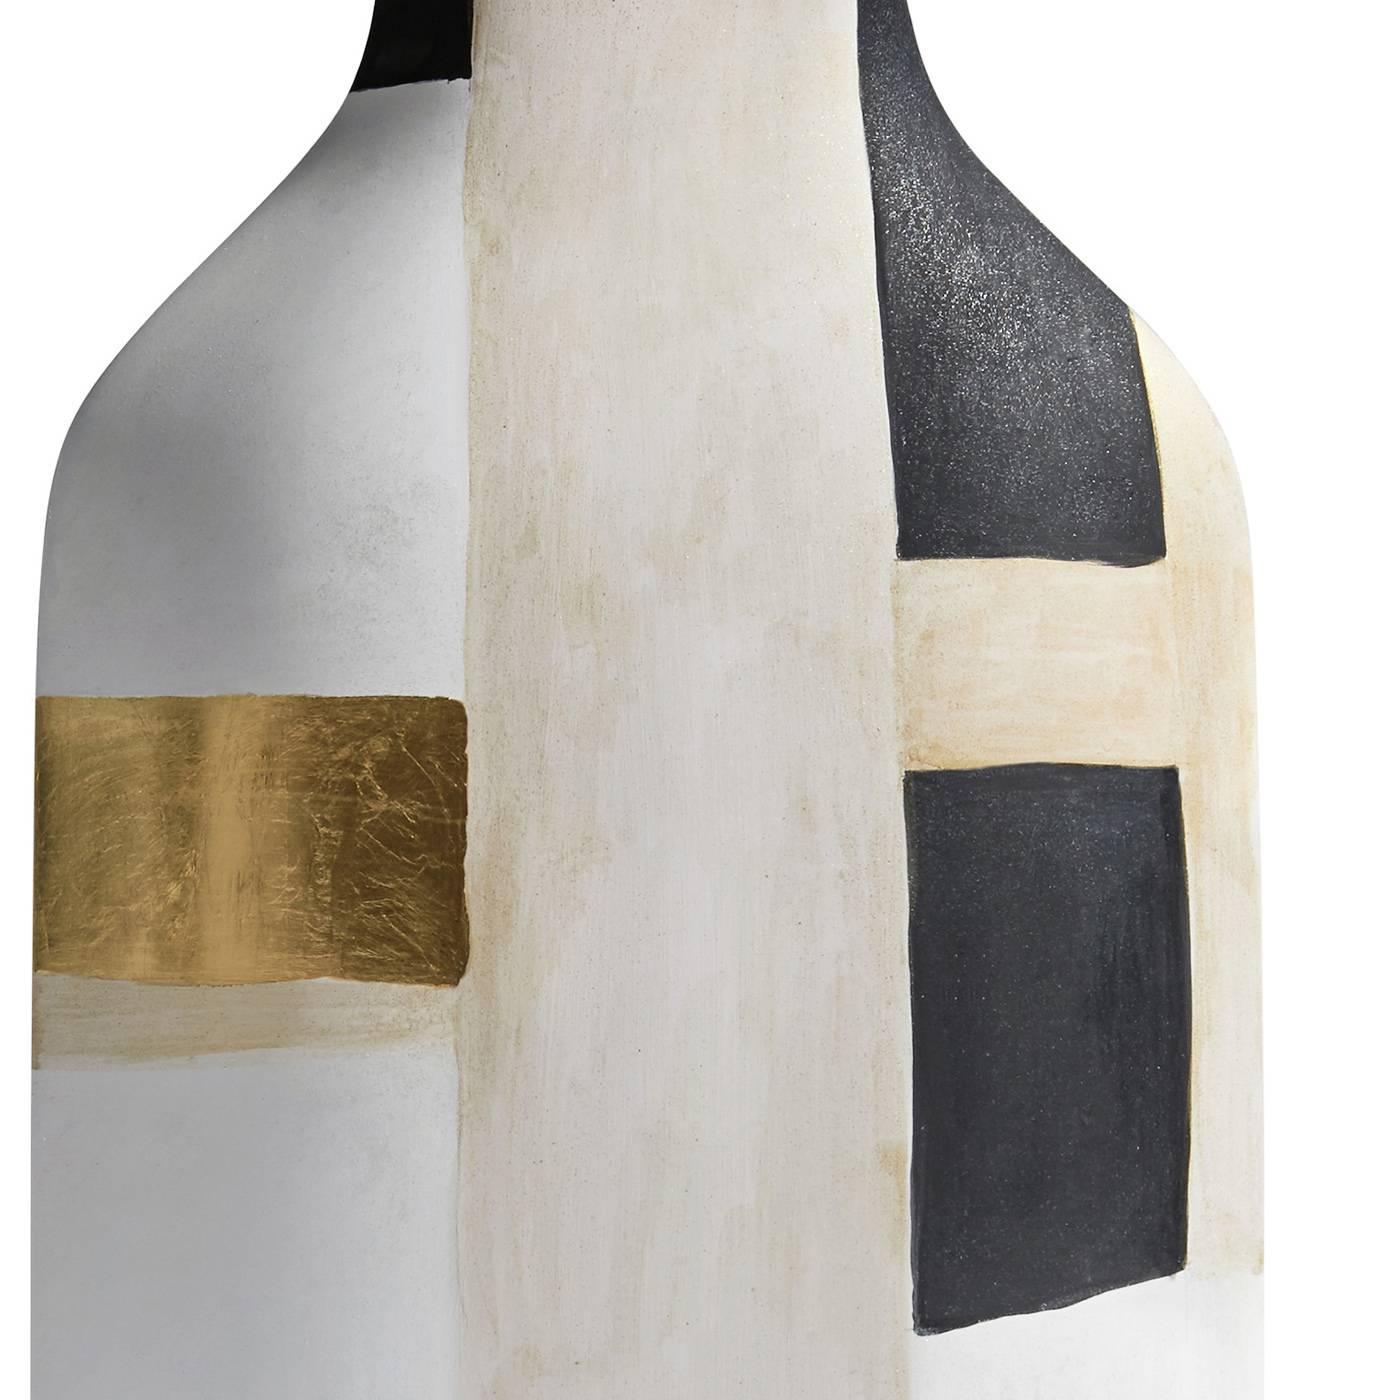 This sophisticated handmade ceramic vase features a simple silhouette and contemporary decorations that were applied by hand. Part of a limited edition of 50 pieces, this vase features a white finish with abstract black decorations and touches of